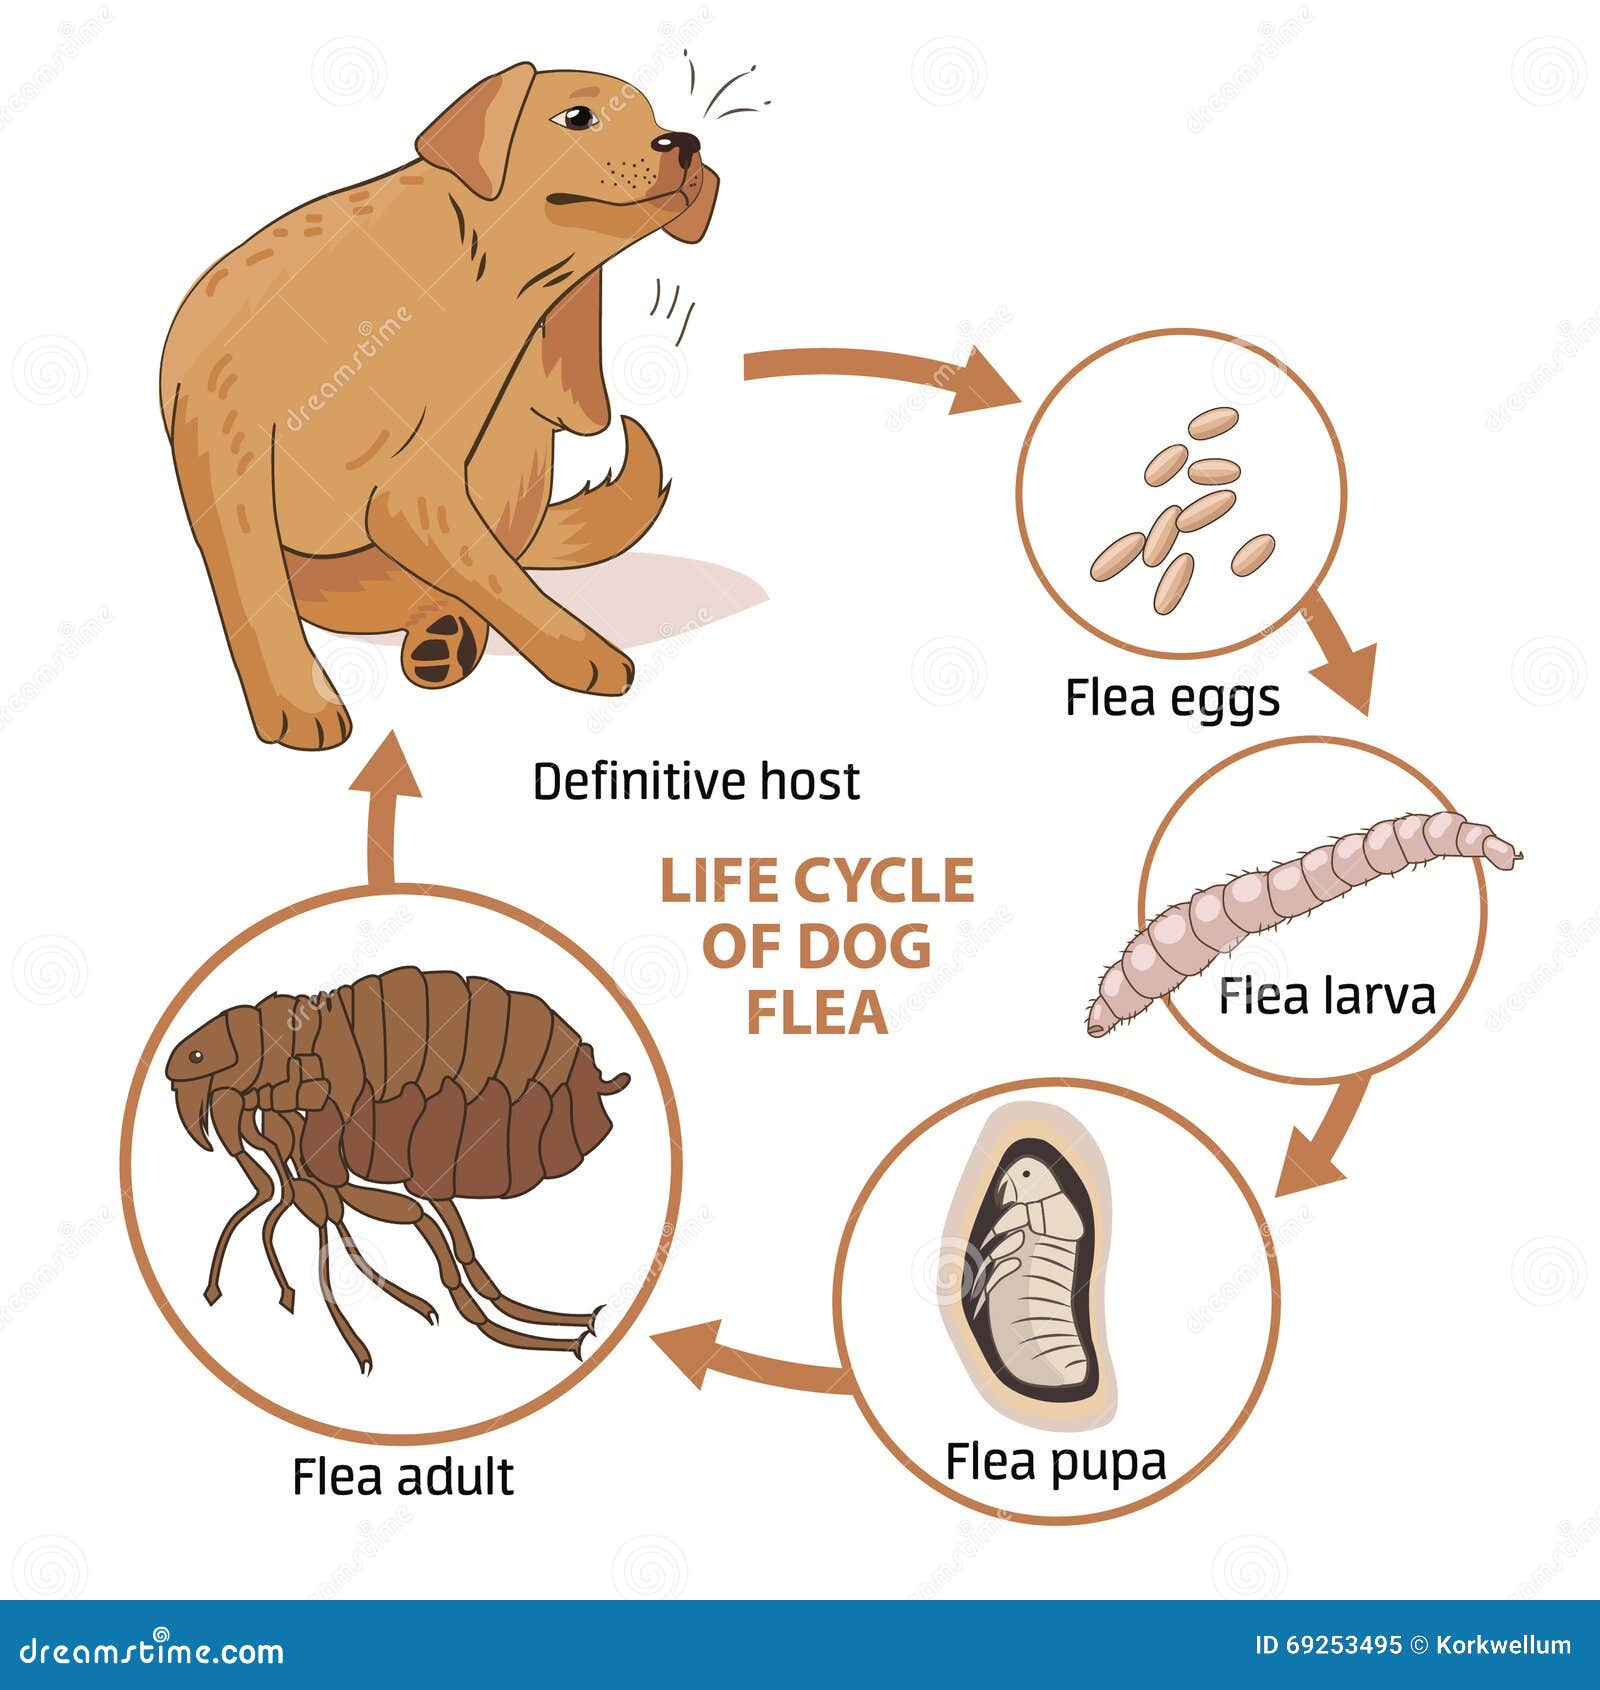 life cycle of dog flea.  . infection. the spread of infection. diseases. fleas animals.